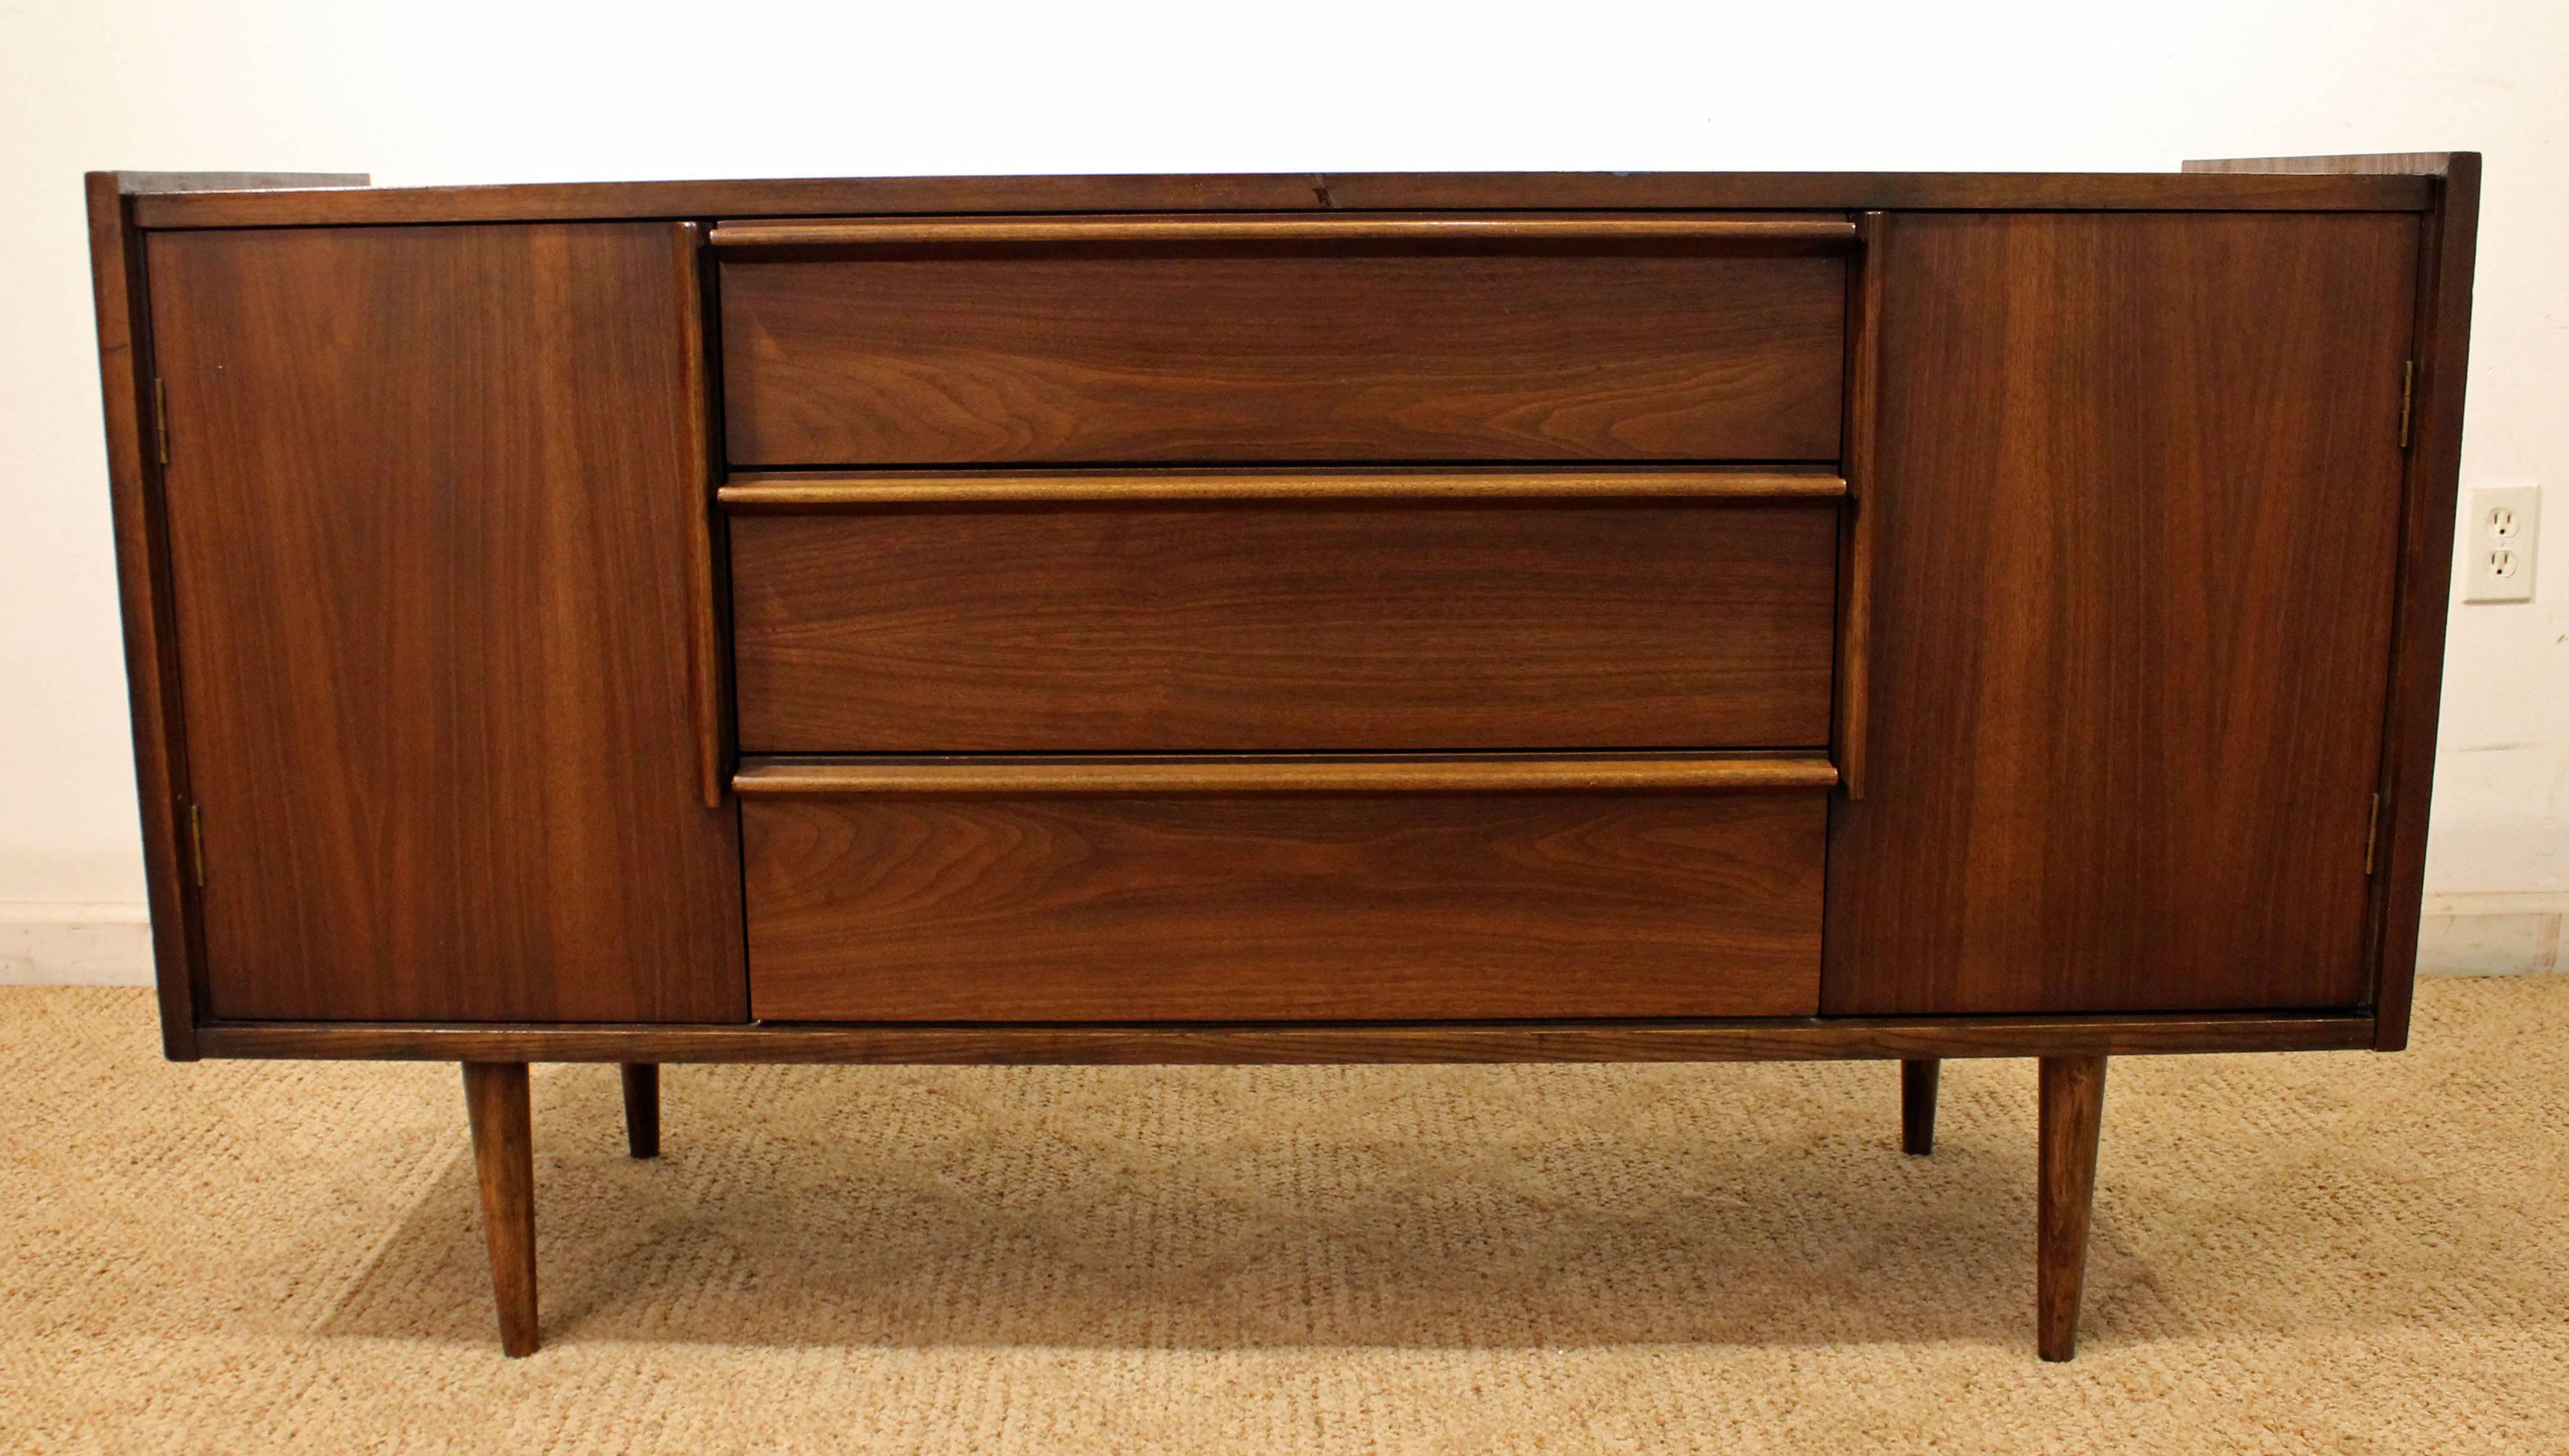 This credenza is made of walnut, has 2 doors on each side with shelving, and 3 middle drawers. Has been refinished.